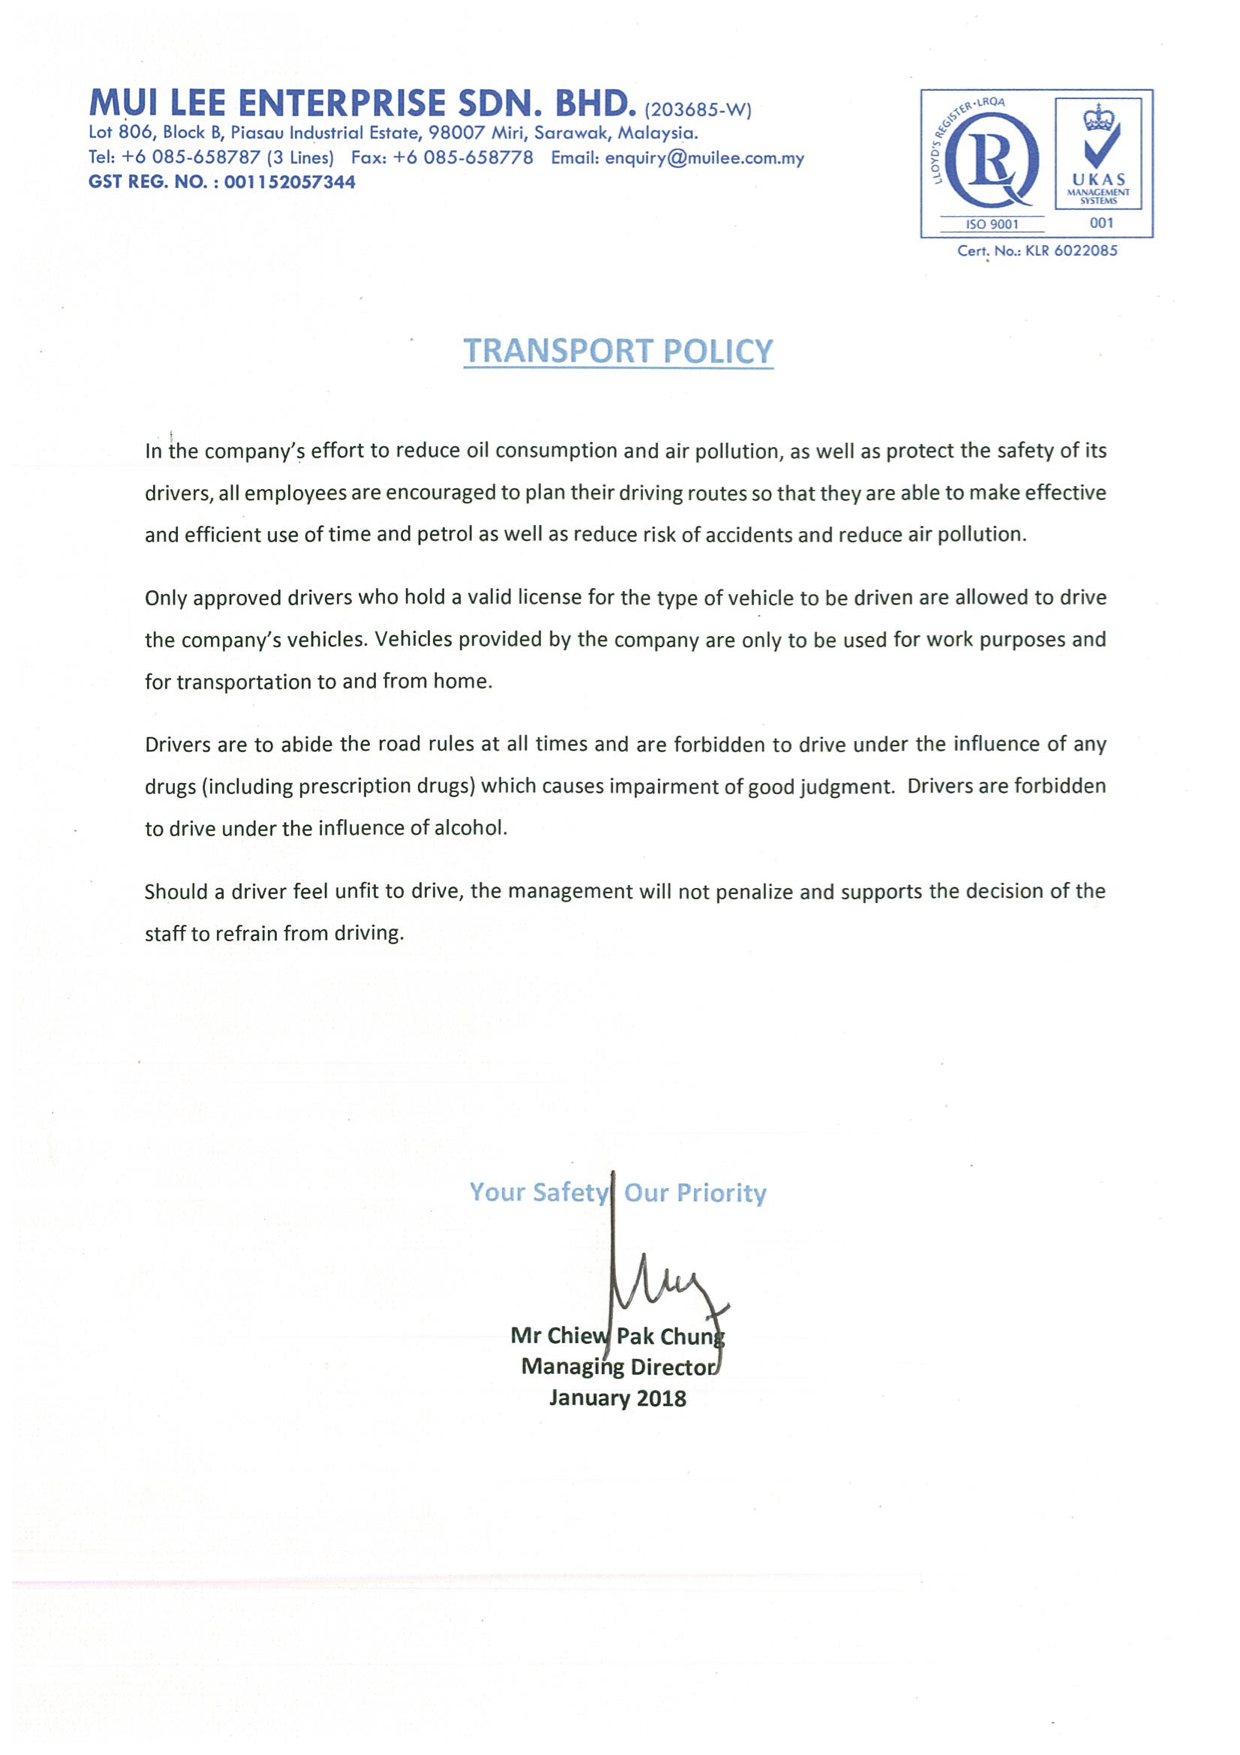 Transport Policy